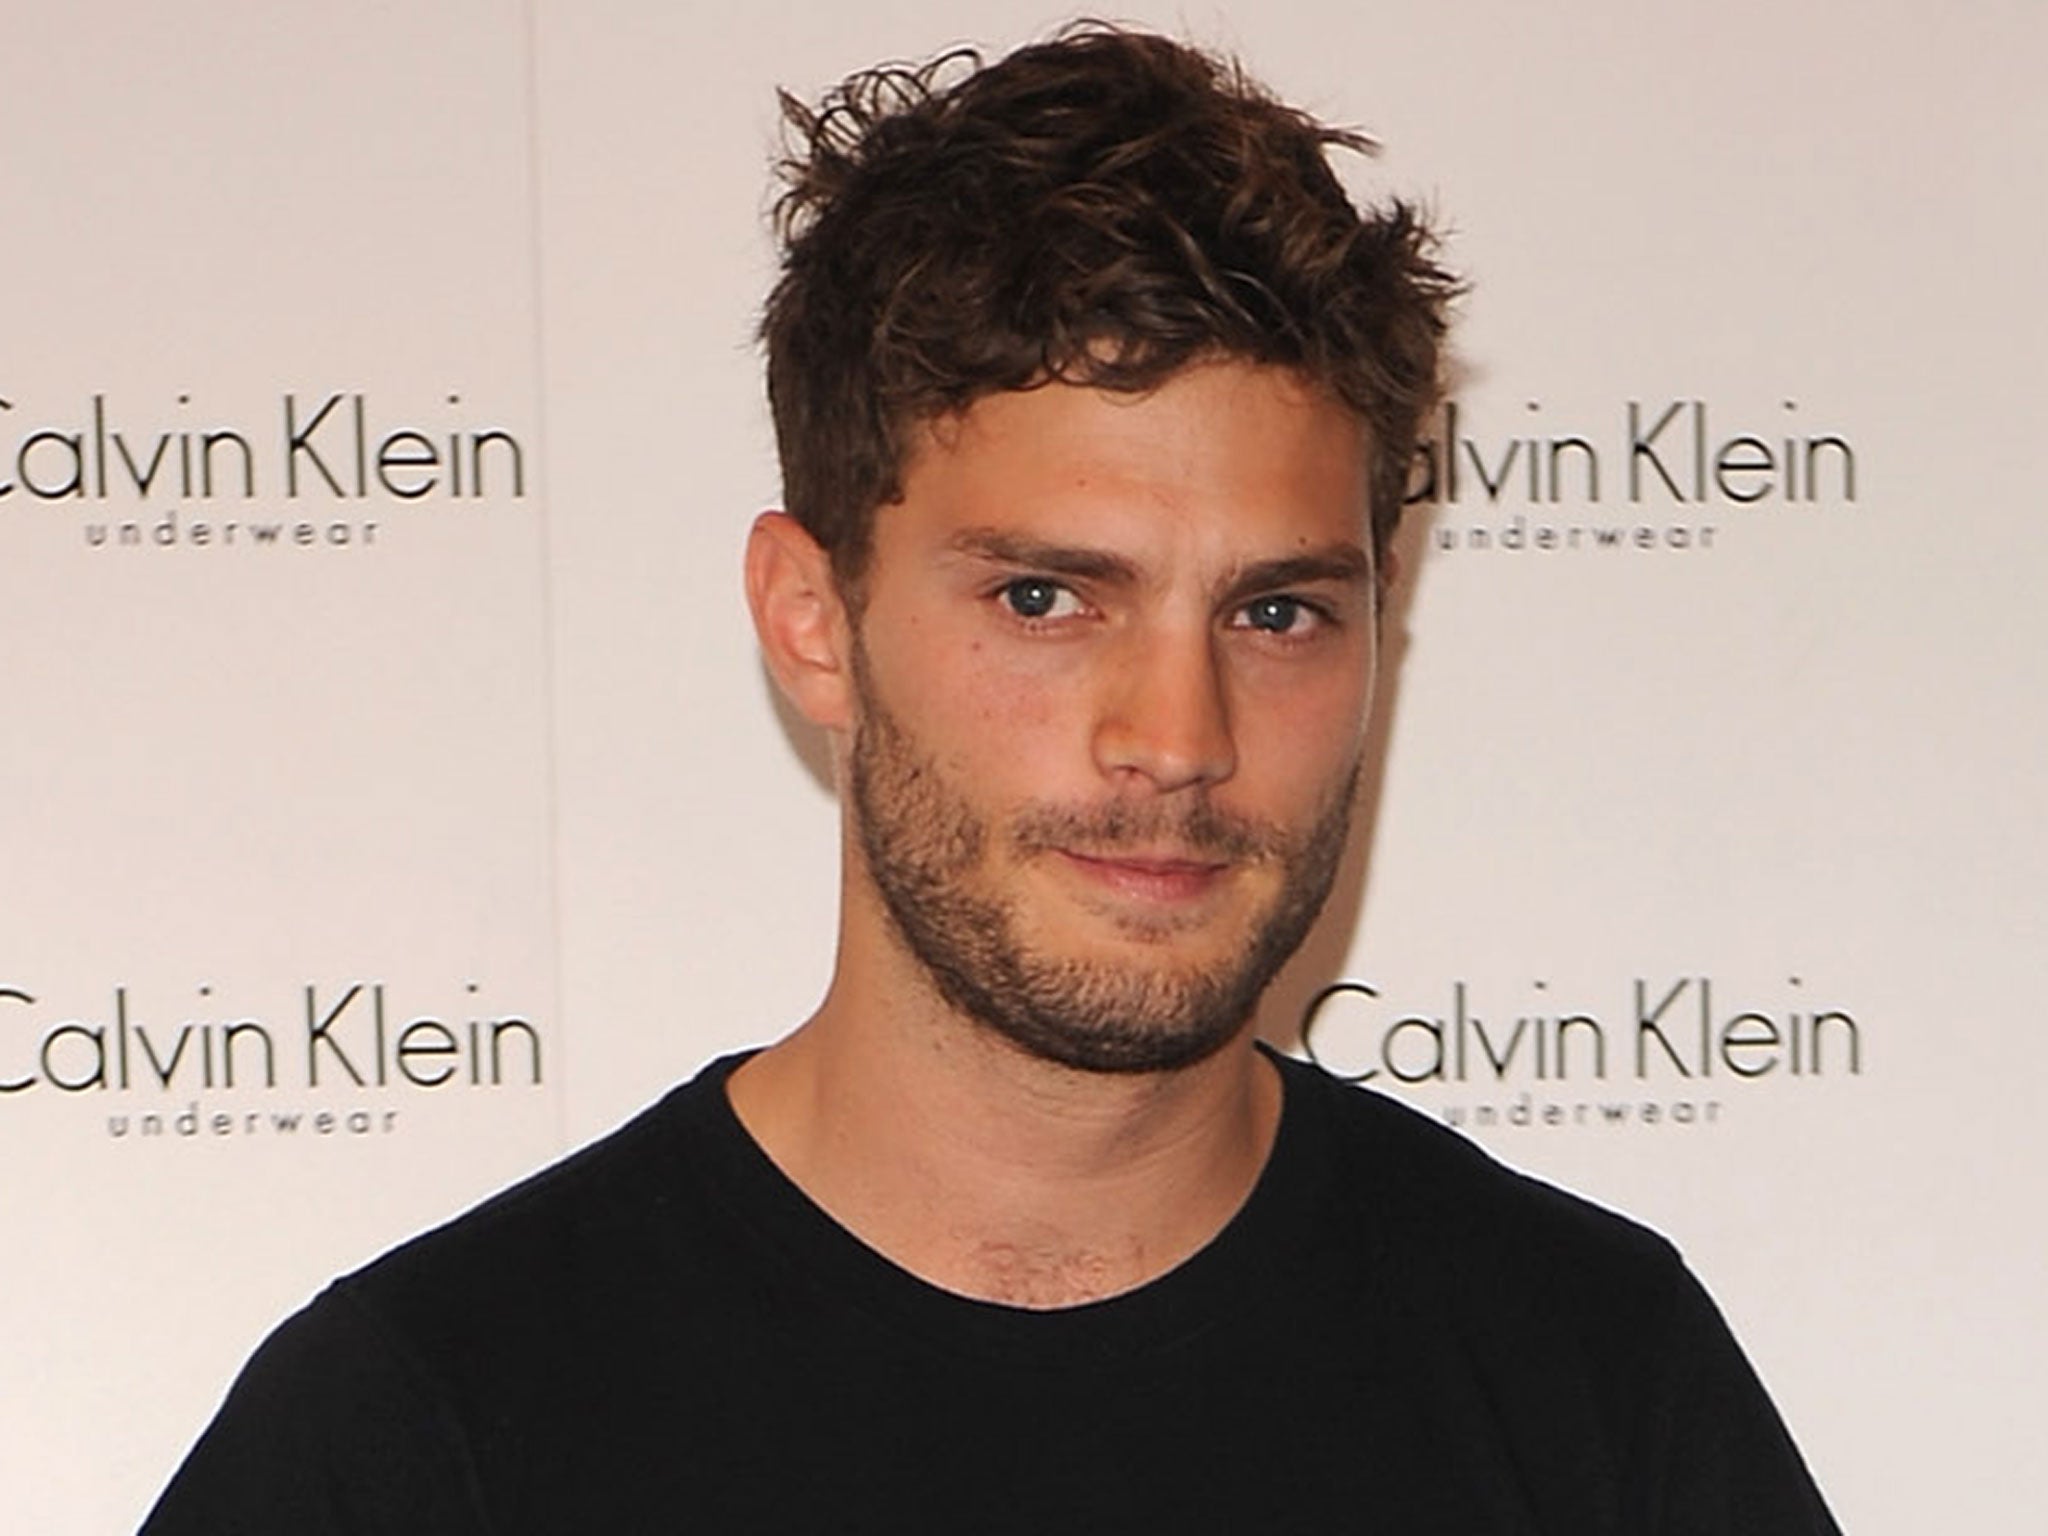 Jamie Dornan is rumoured to be replacing Charlie Hunnam in Fifty Shades of Grey